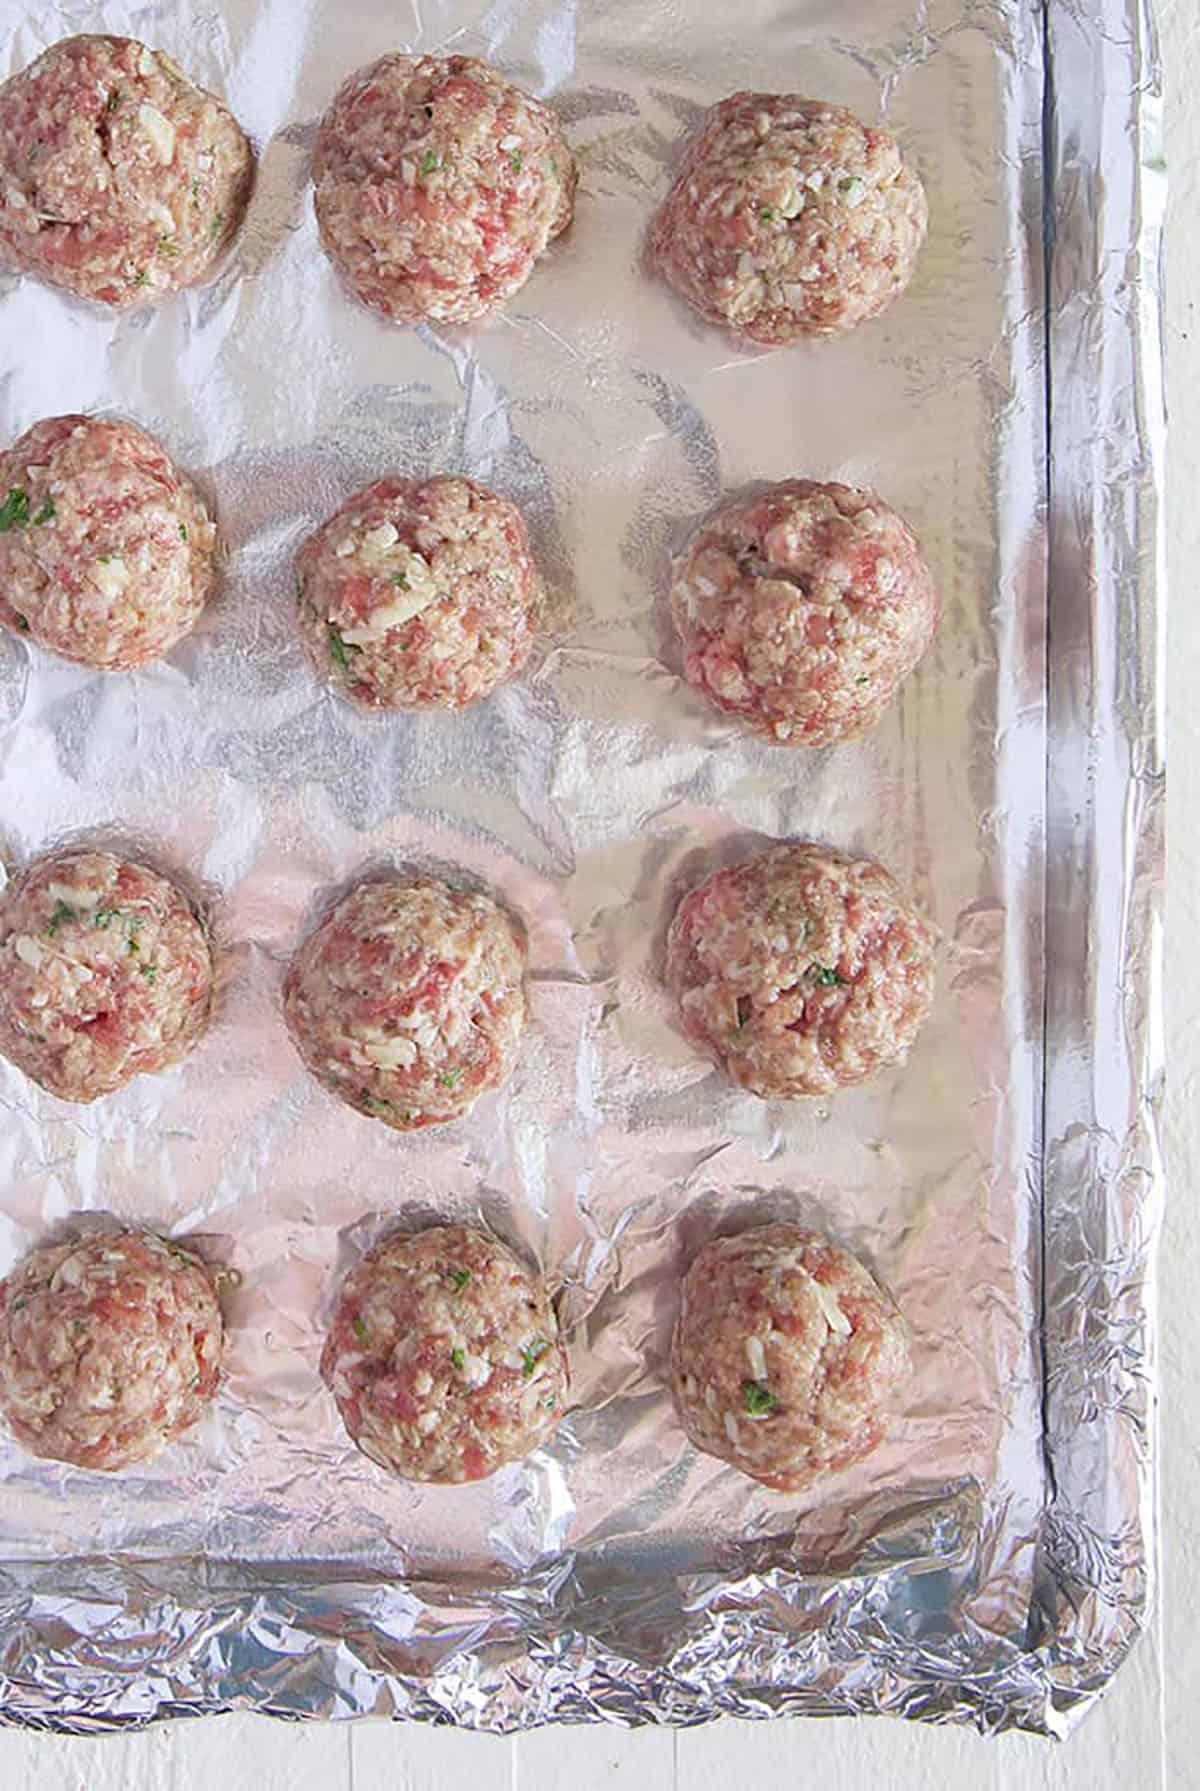 Raw meatballs ready for the oven on a baking sheet with foil.